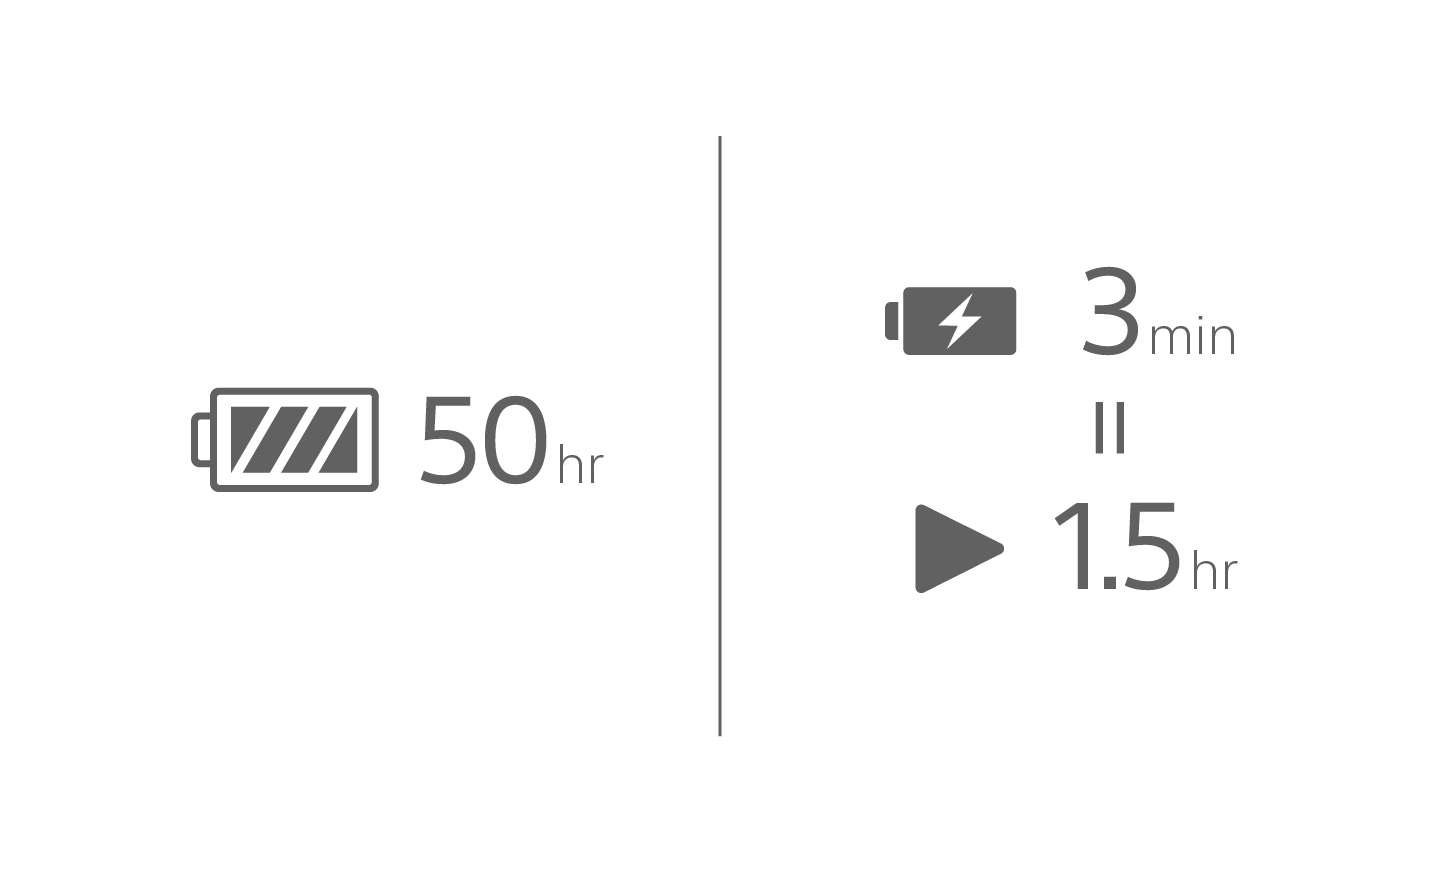 Image of a battery icon with 50 hr text, a charging battery icon with 3 min text above a play icon with 1.5hr text